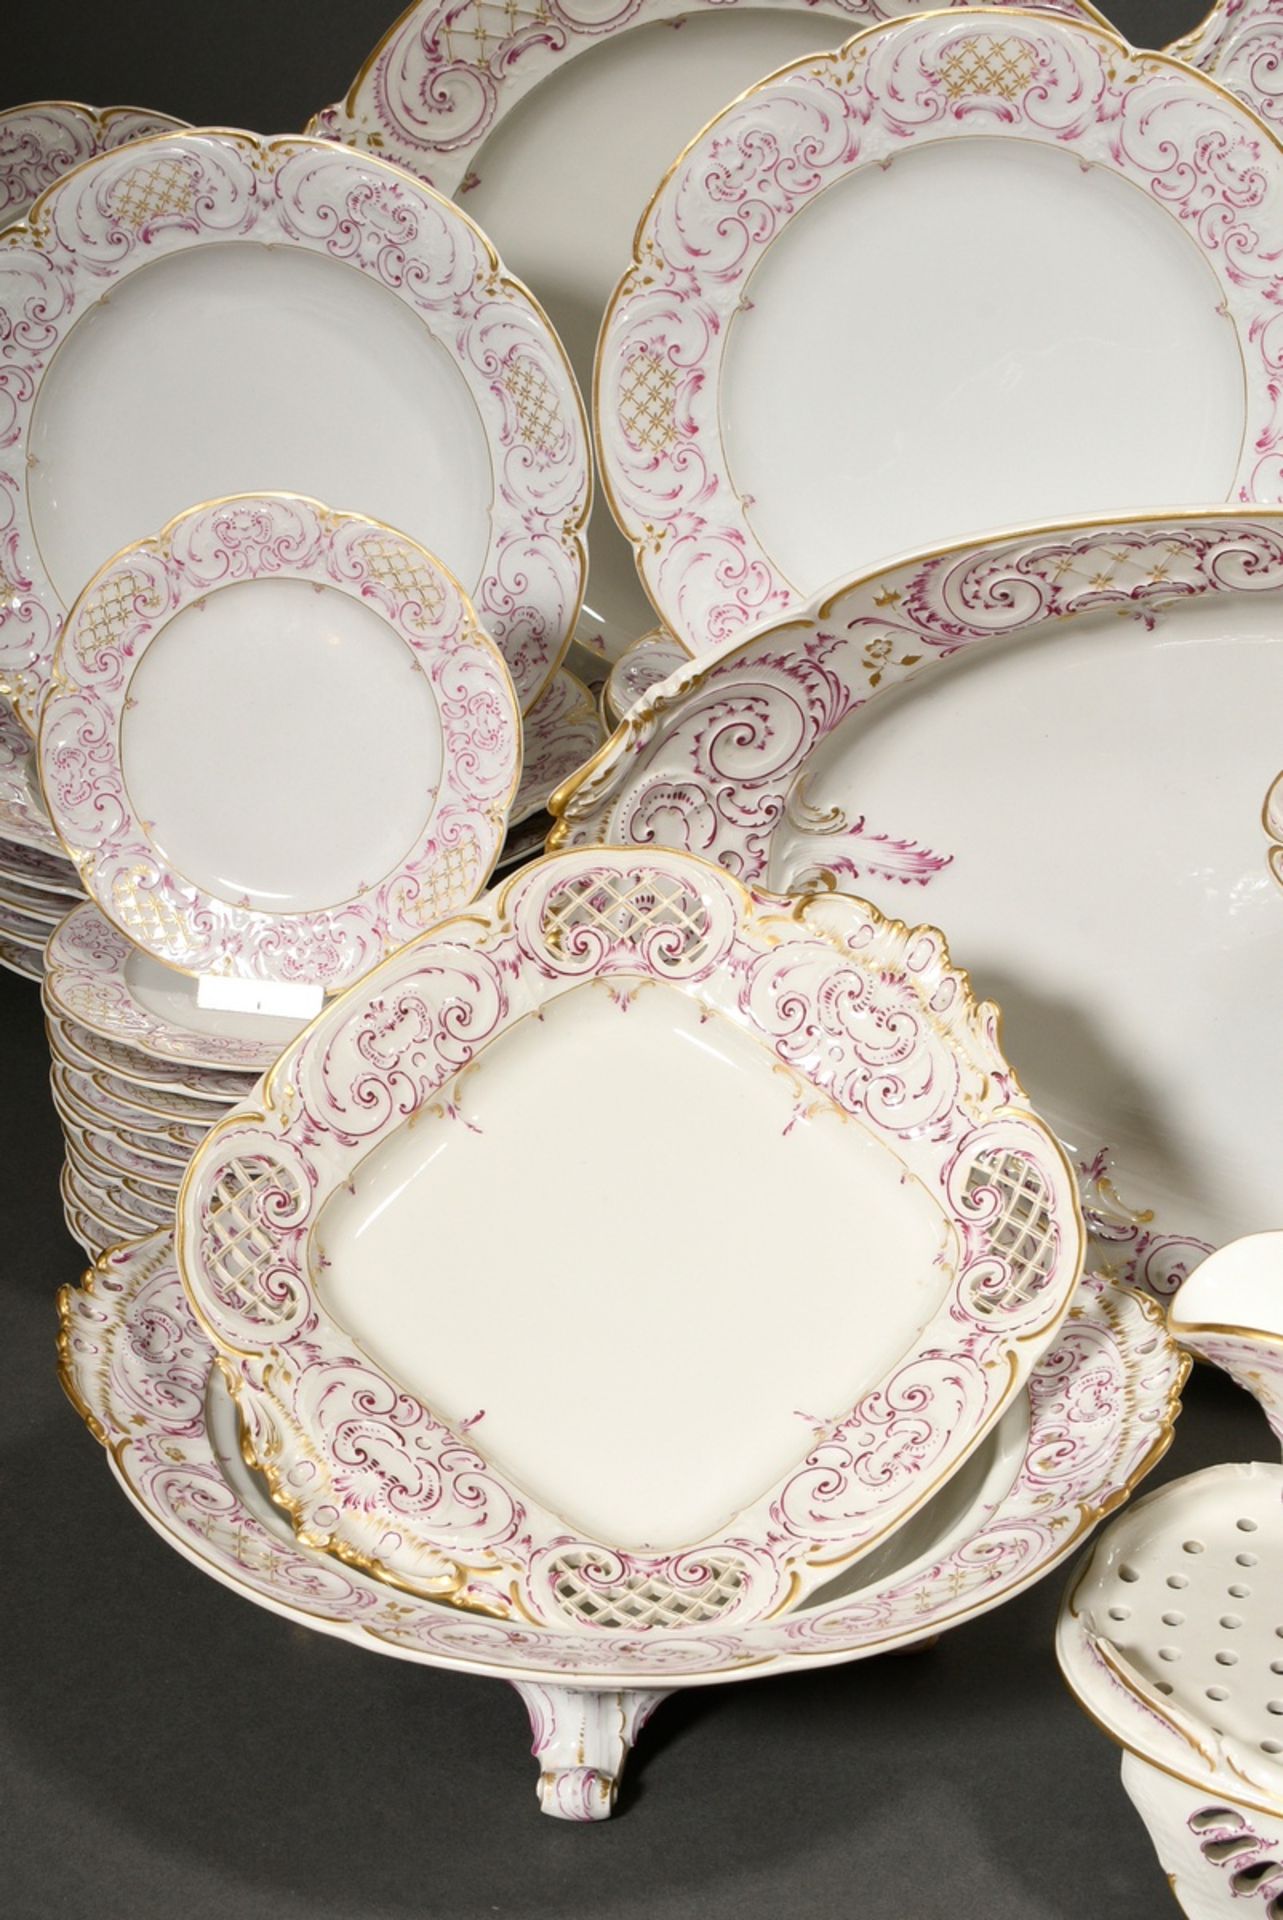 69 Pieces KPM dinner service in Rococo form with purple and gold staffage, red imperial orb mark, c - Image 6 of 22